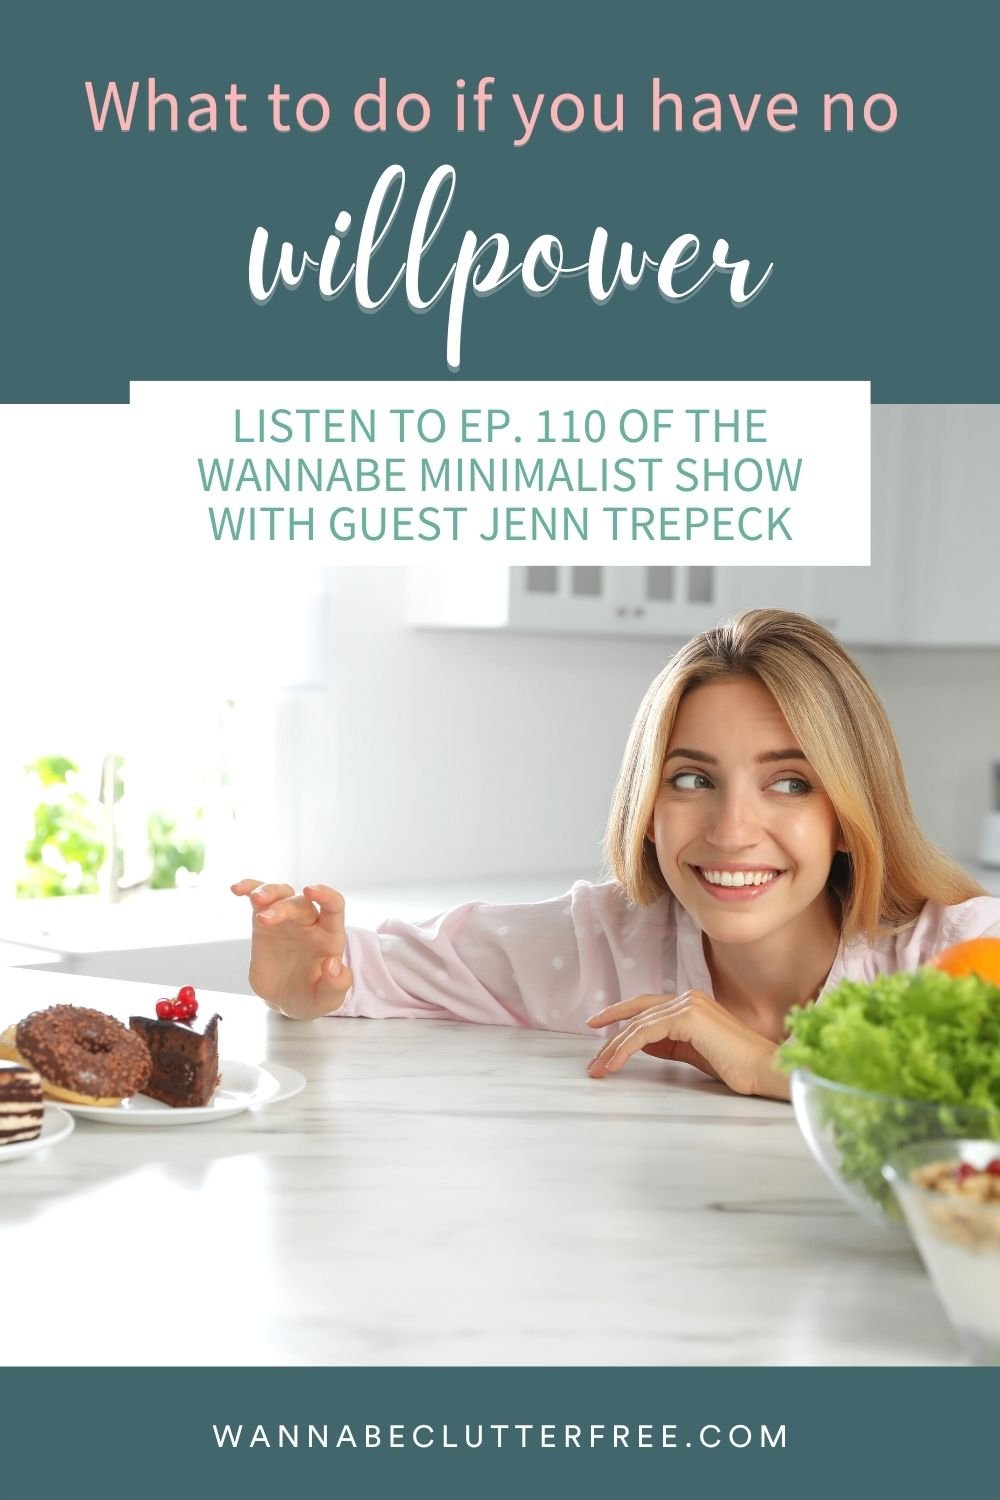 What to do if you have no willpower